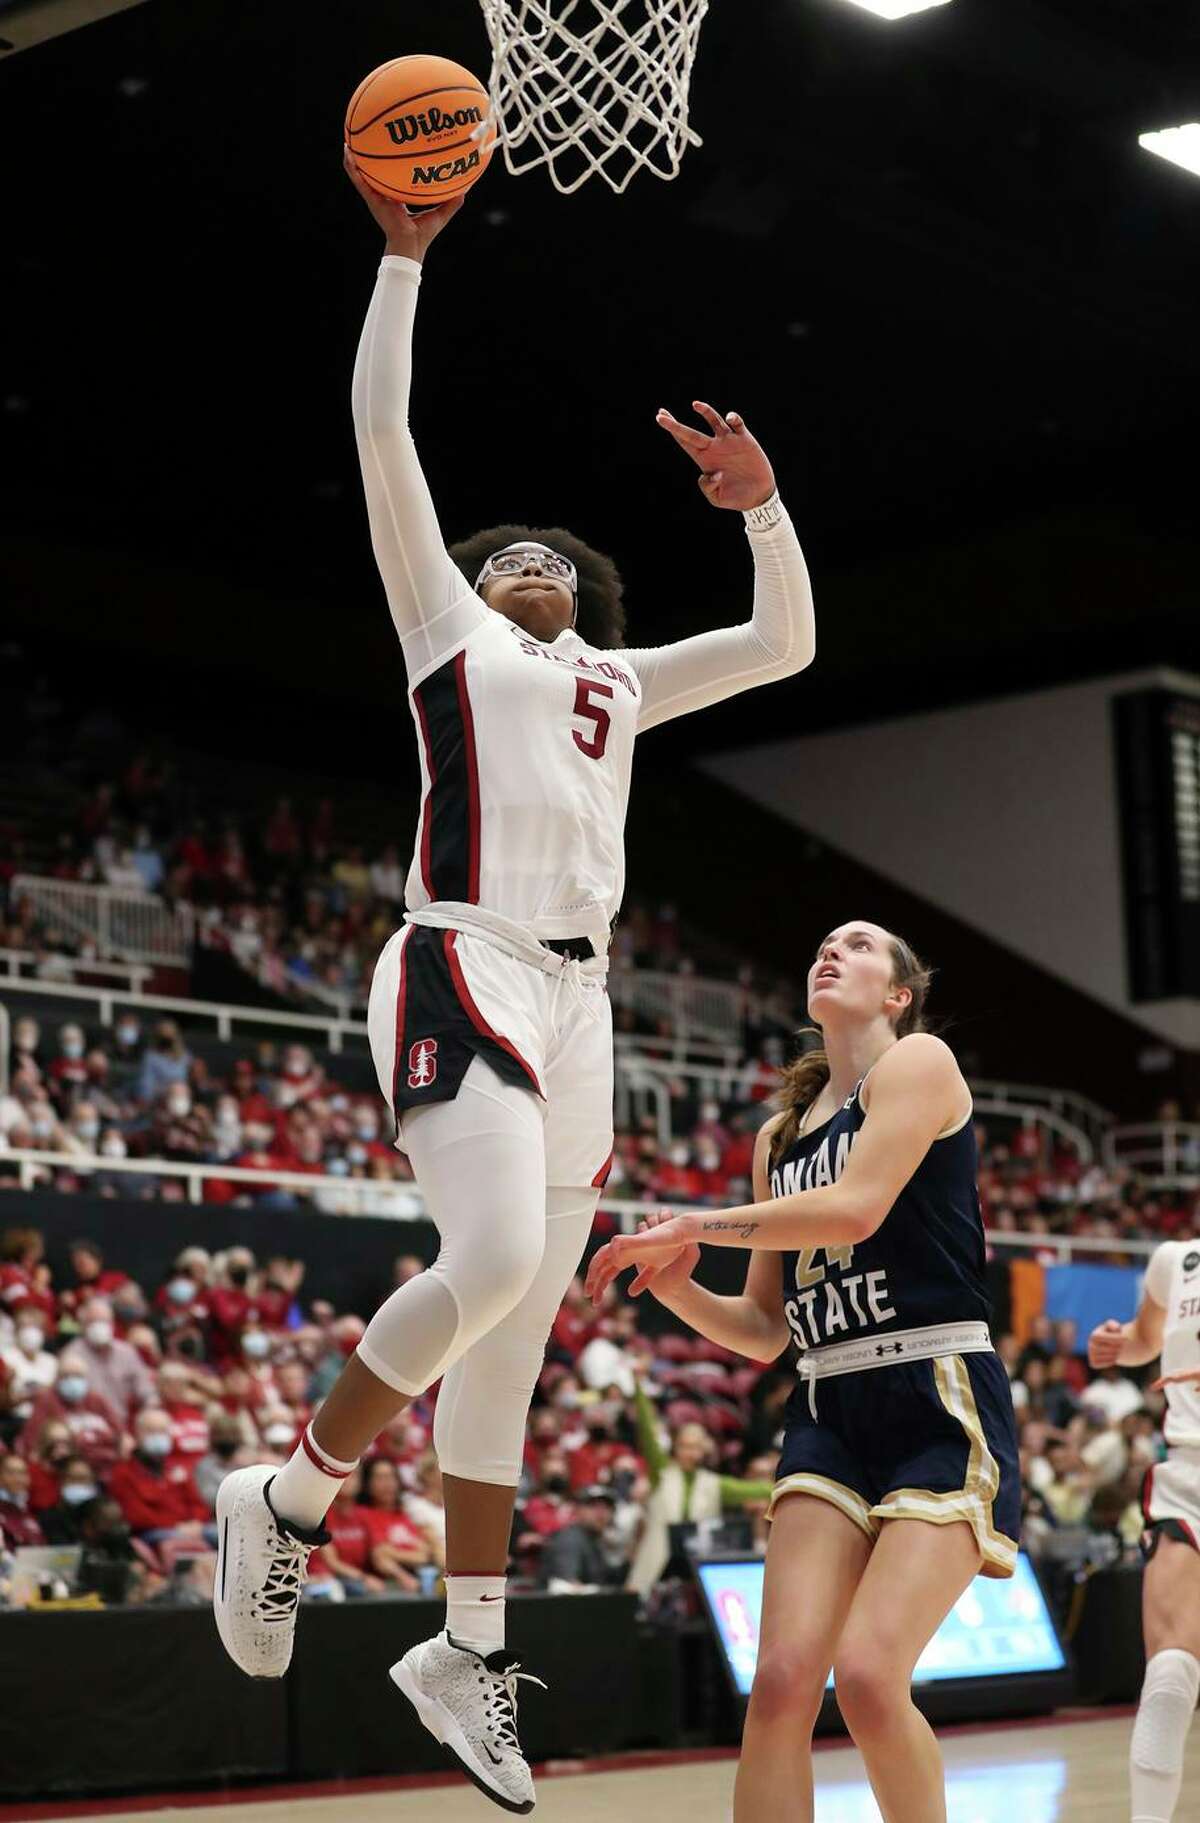 Stanford's Fran Belibi dunks against Montana State's Taylor Janssen in 2nd quarter during NCAA Division I Women's Basketball Championship First Round game at Maples Pavilion in Stanford, Calif., on Friday, March 18, 2022.